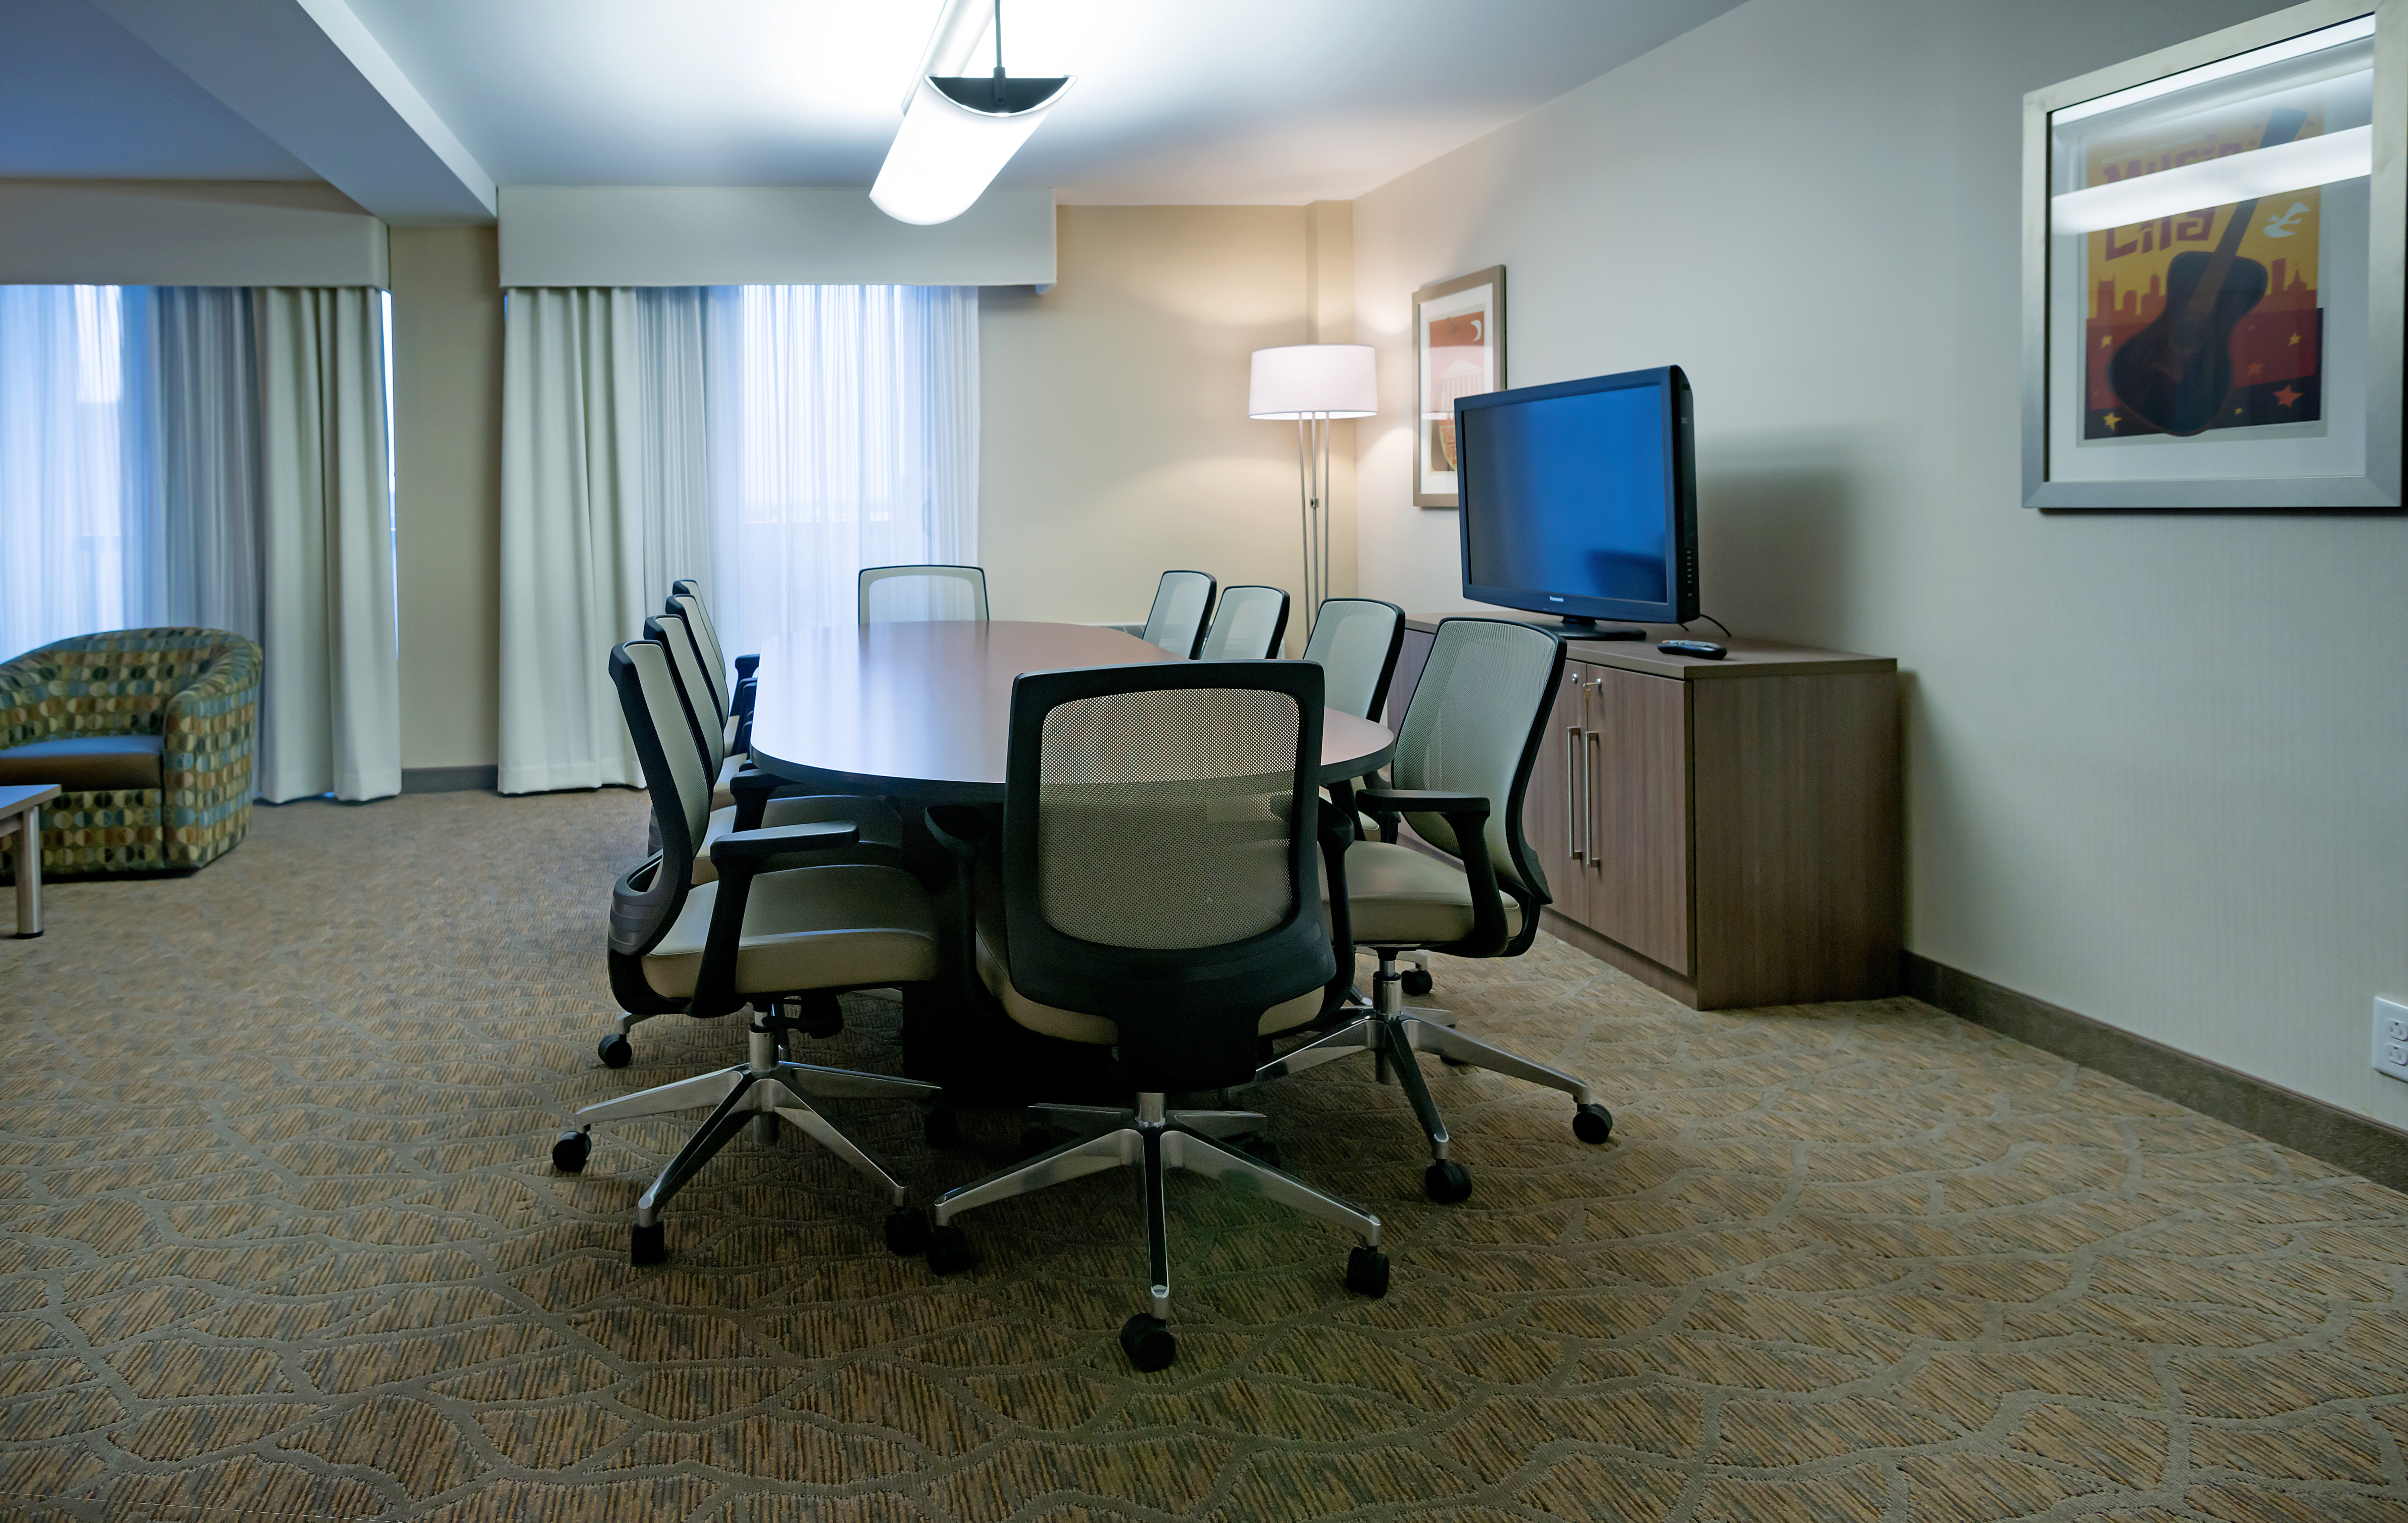 Holiday Inn Vanderbilt Suite with Conference Table & Sitting Area